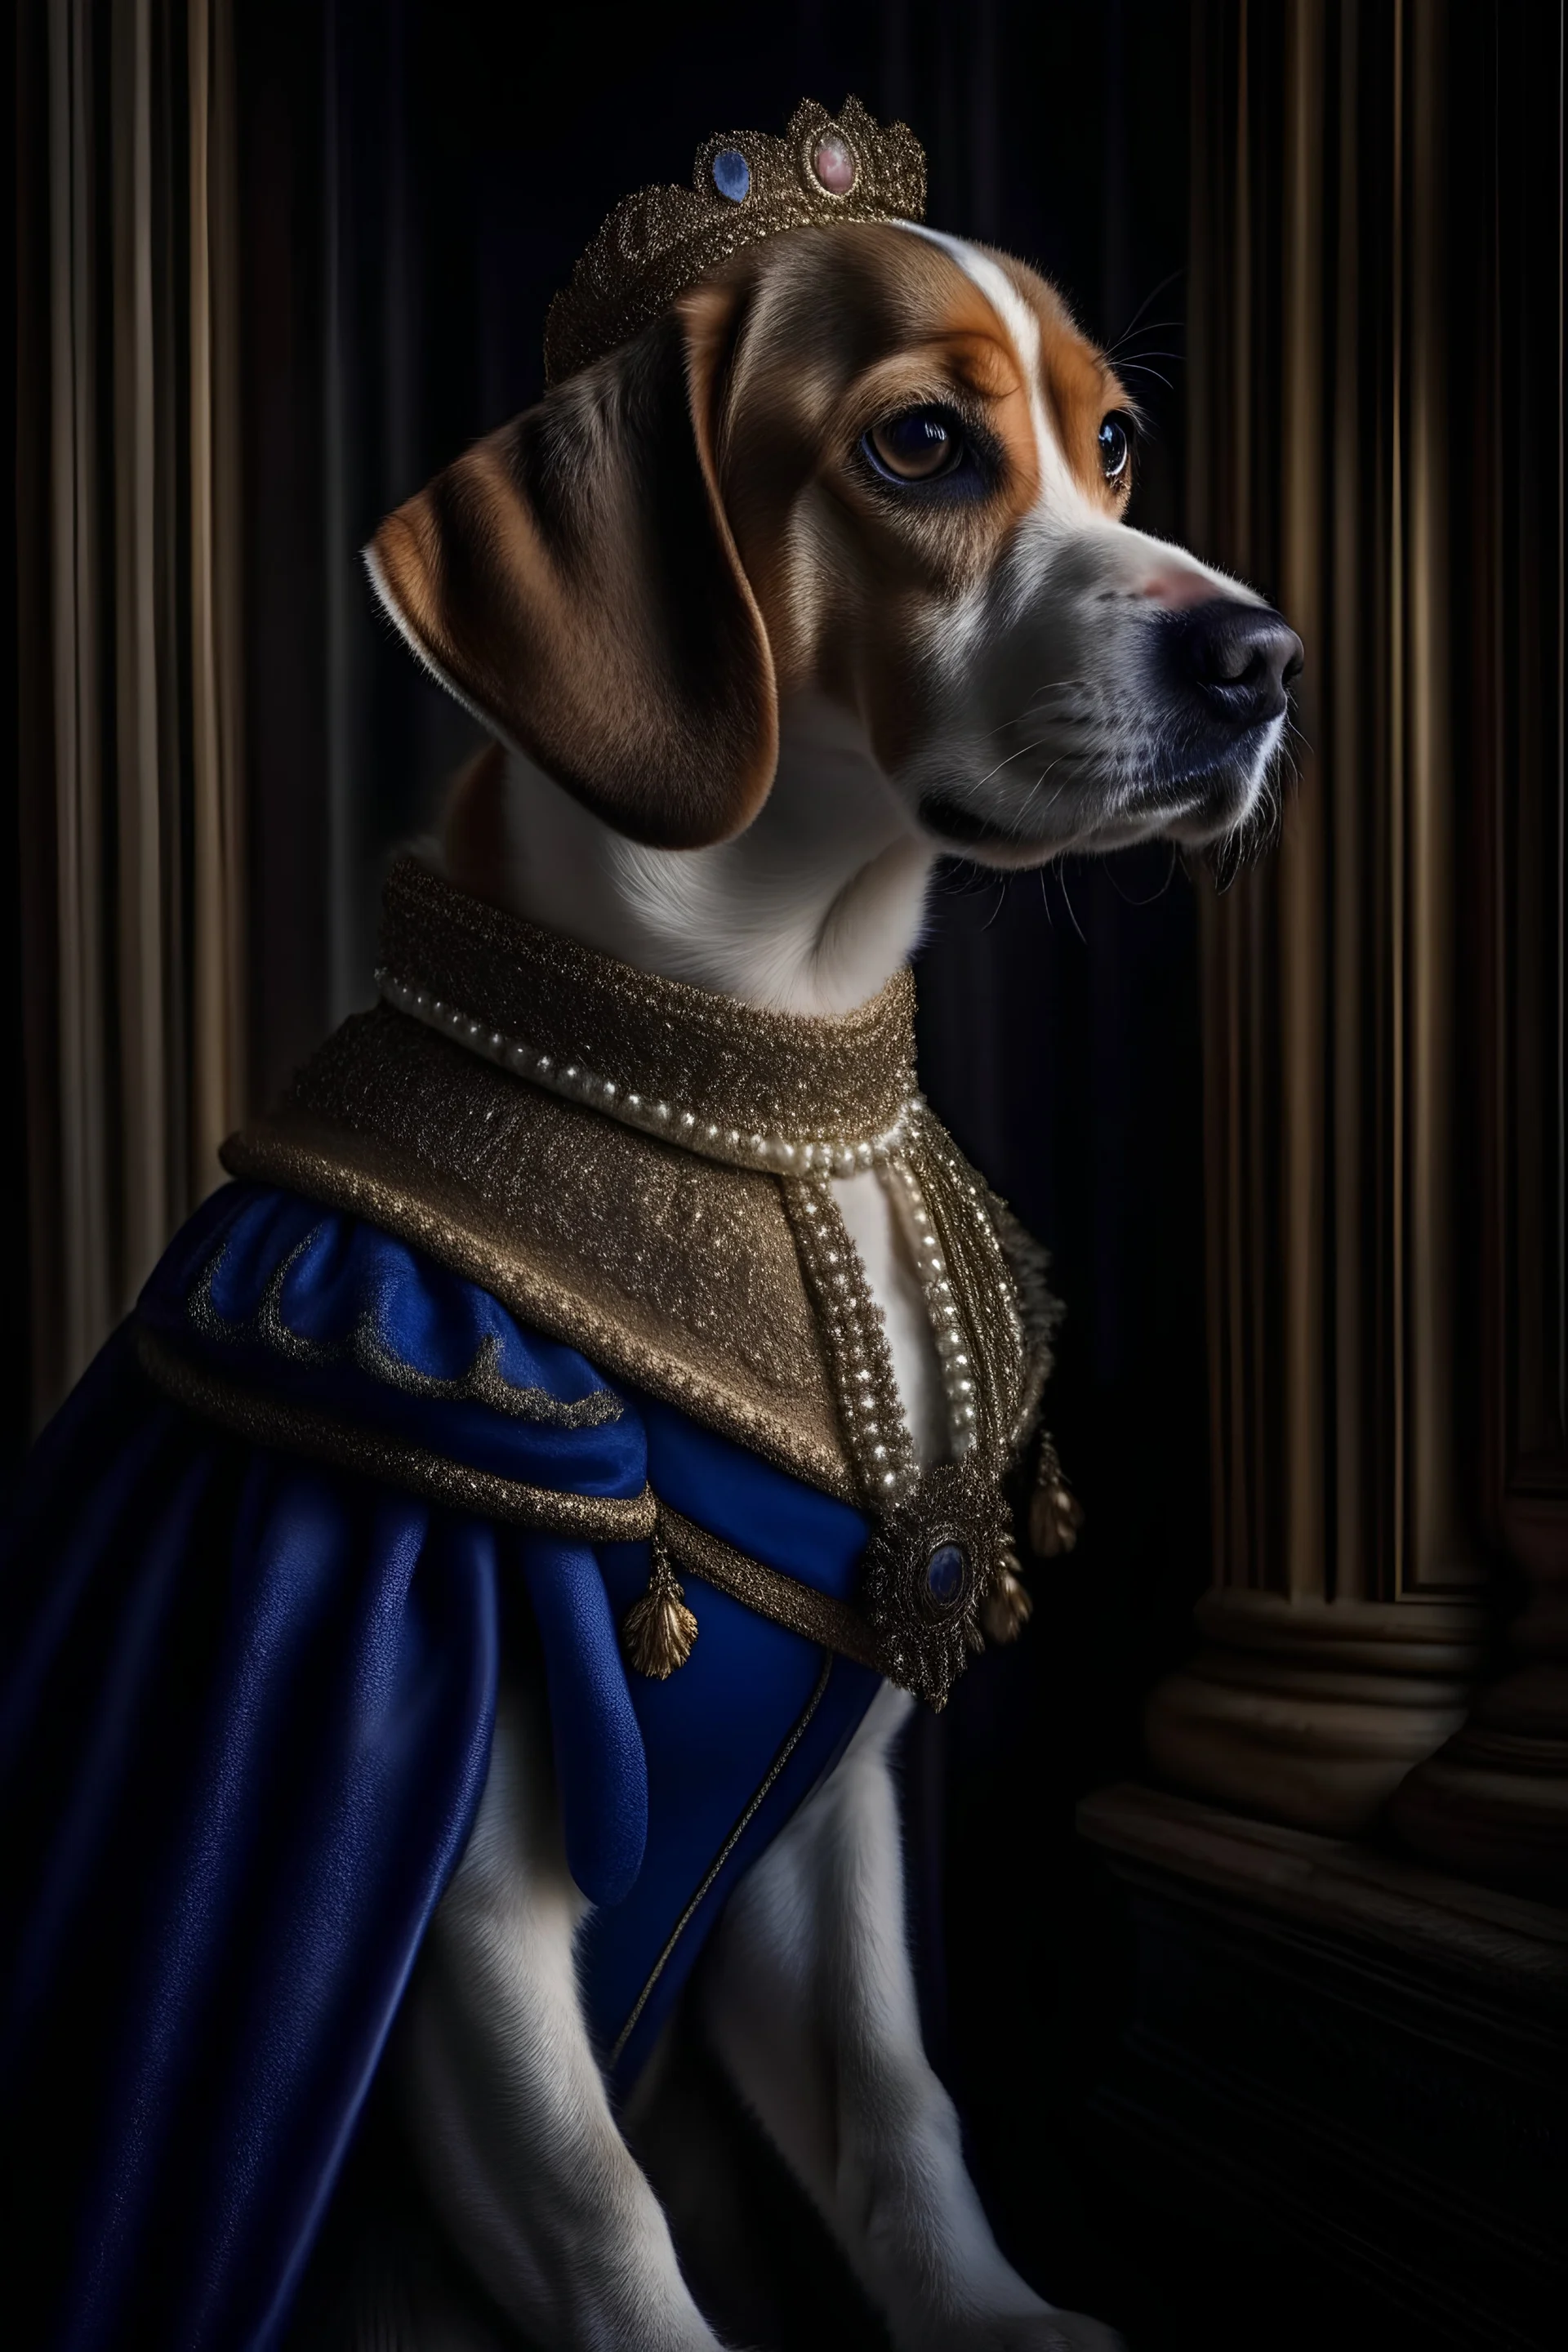 Ultra realistic photo of a small beagle Queen of France, posing proudly in her finery despite her sadness, mid body. Cinematic, rococo style, hyper-realistic photo by Marta Bevacqua.